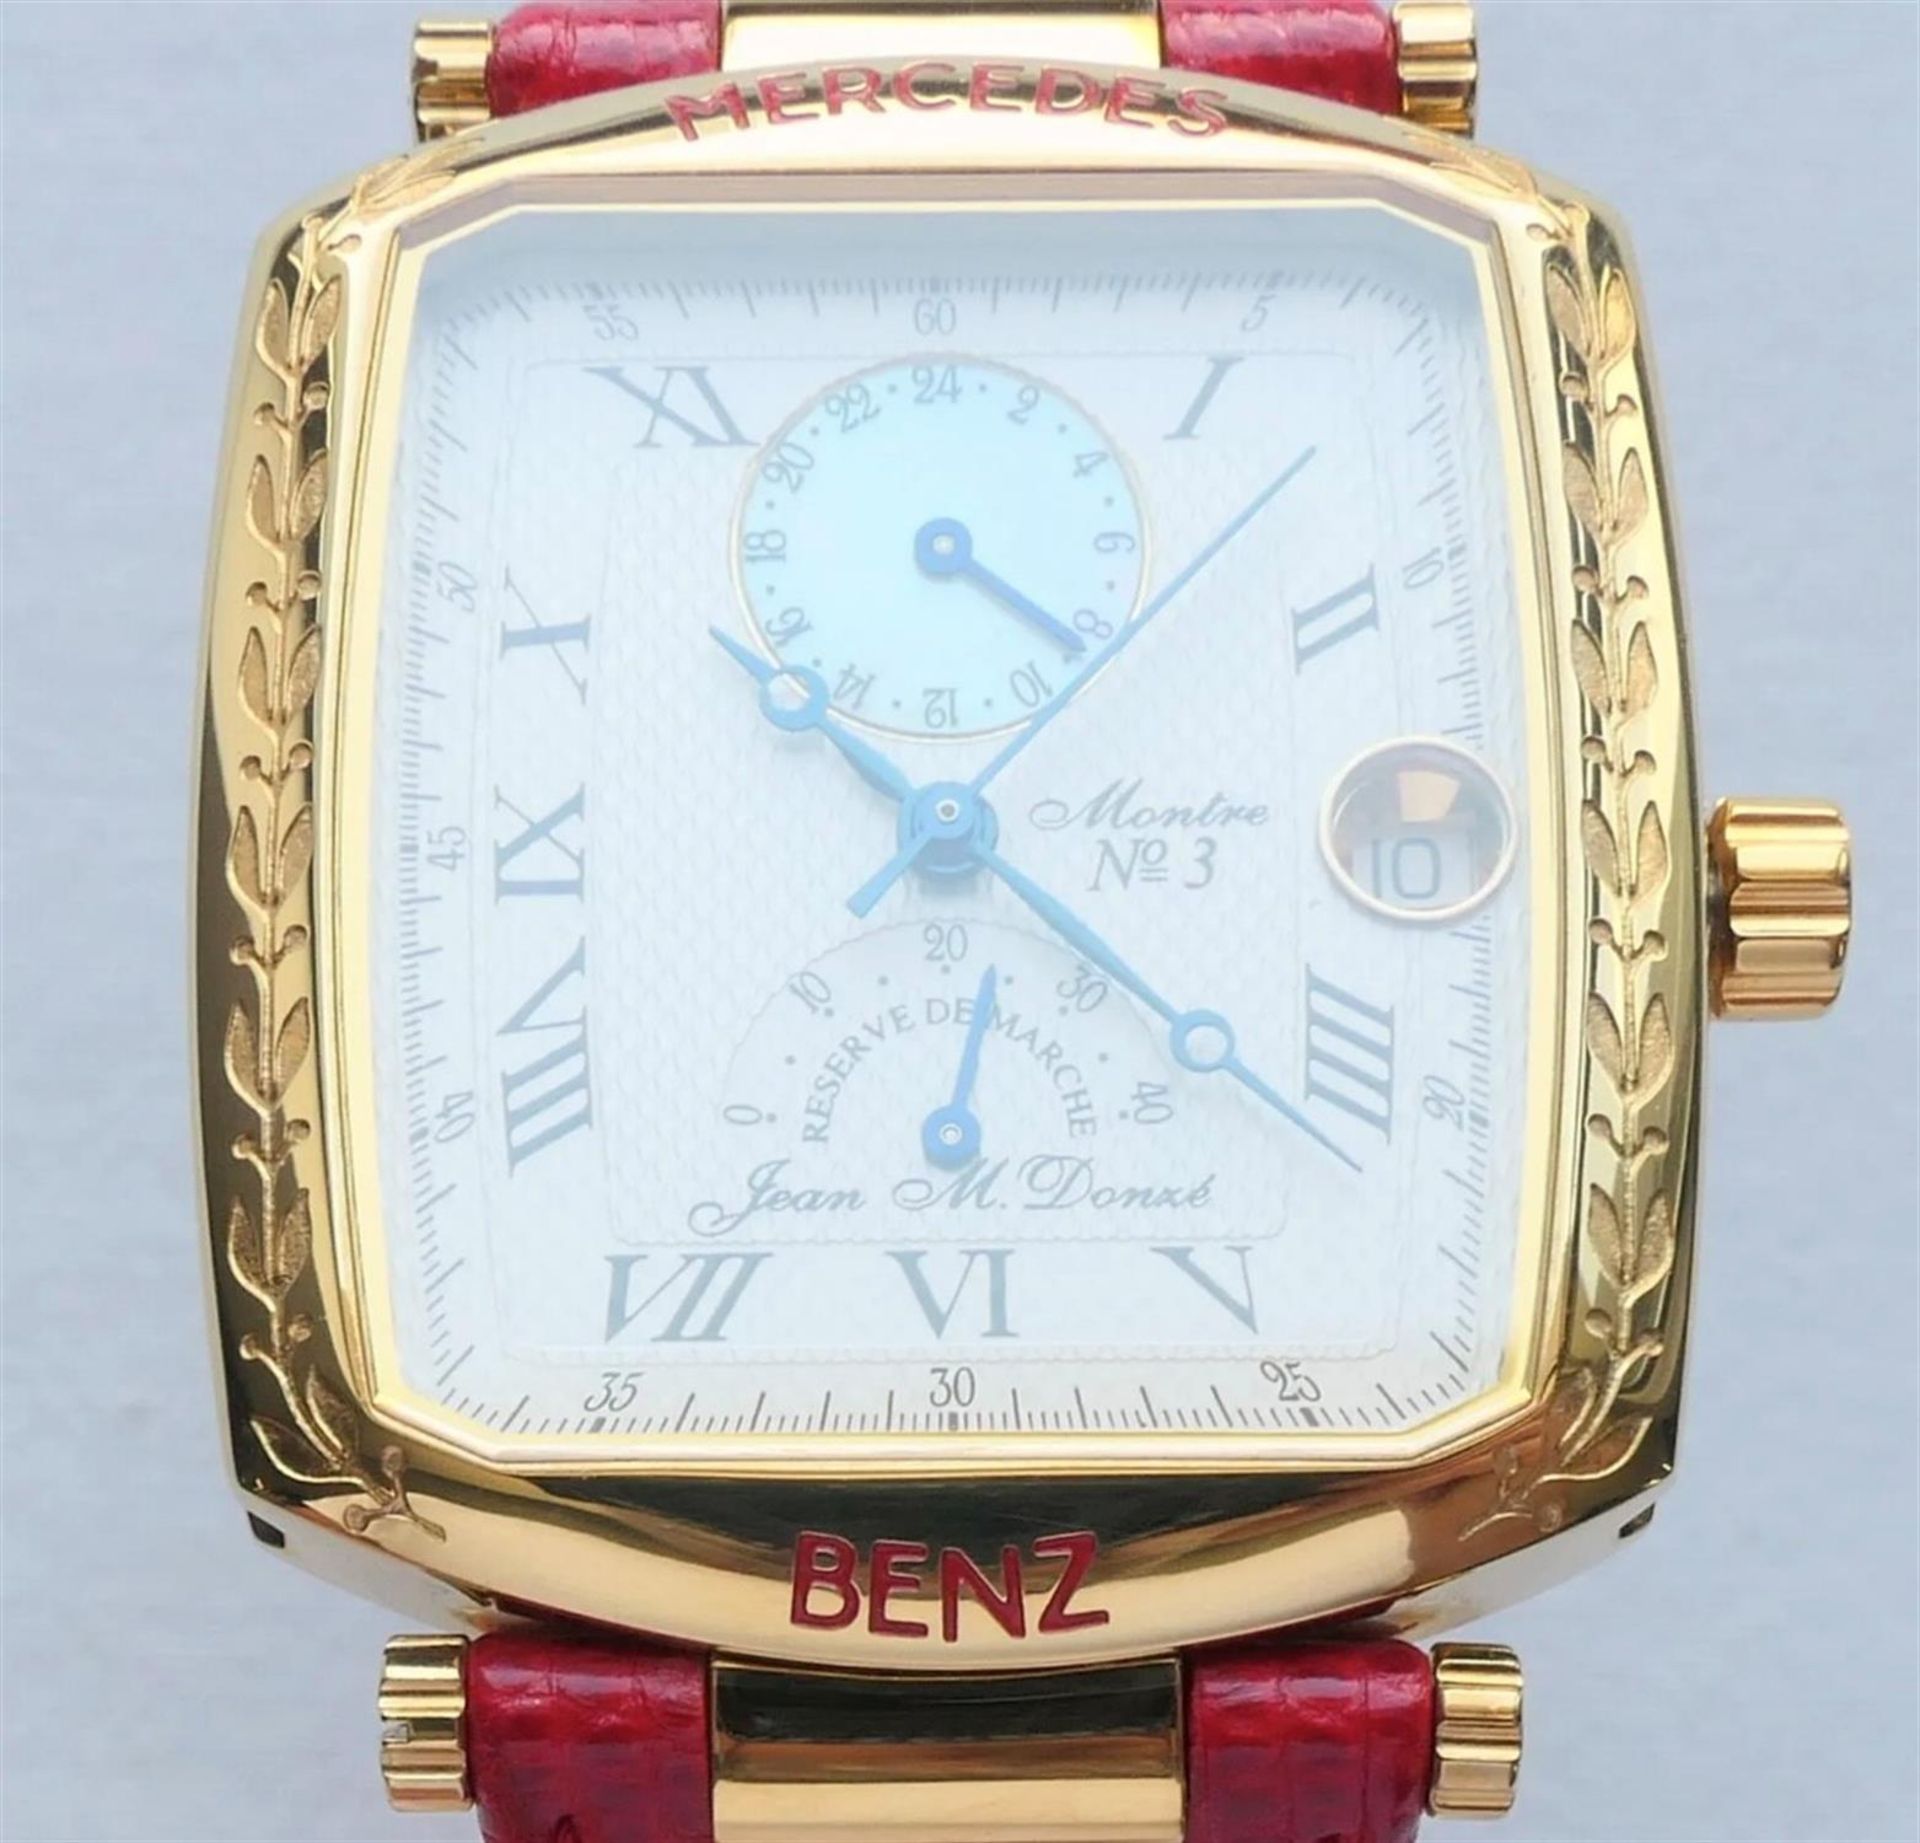 A 18ct Gold-Plated Mercedes-Benz Swiss-Made Automatic Wrist Watch - Image 8 of 10